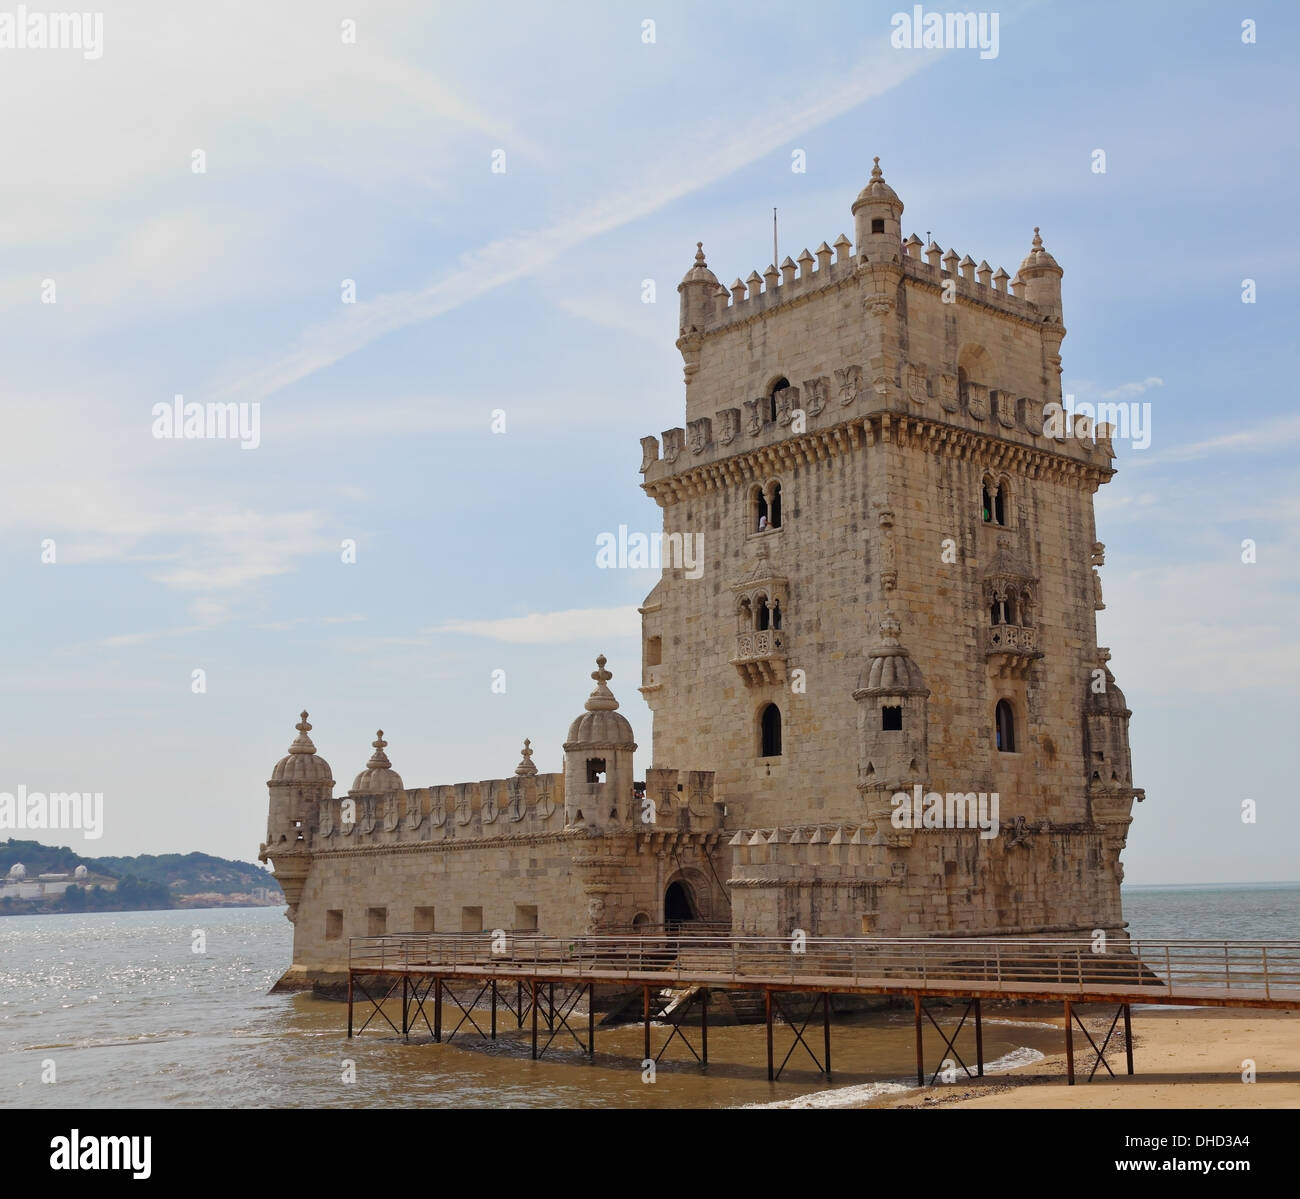 The fortress of Belem in Lisbon Stock Photo